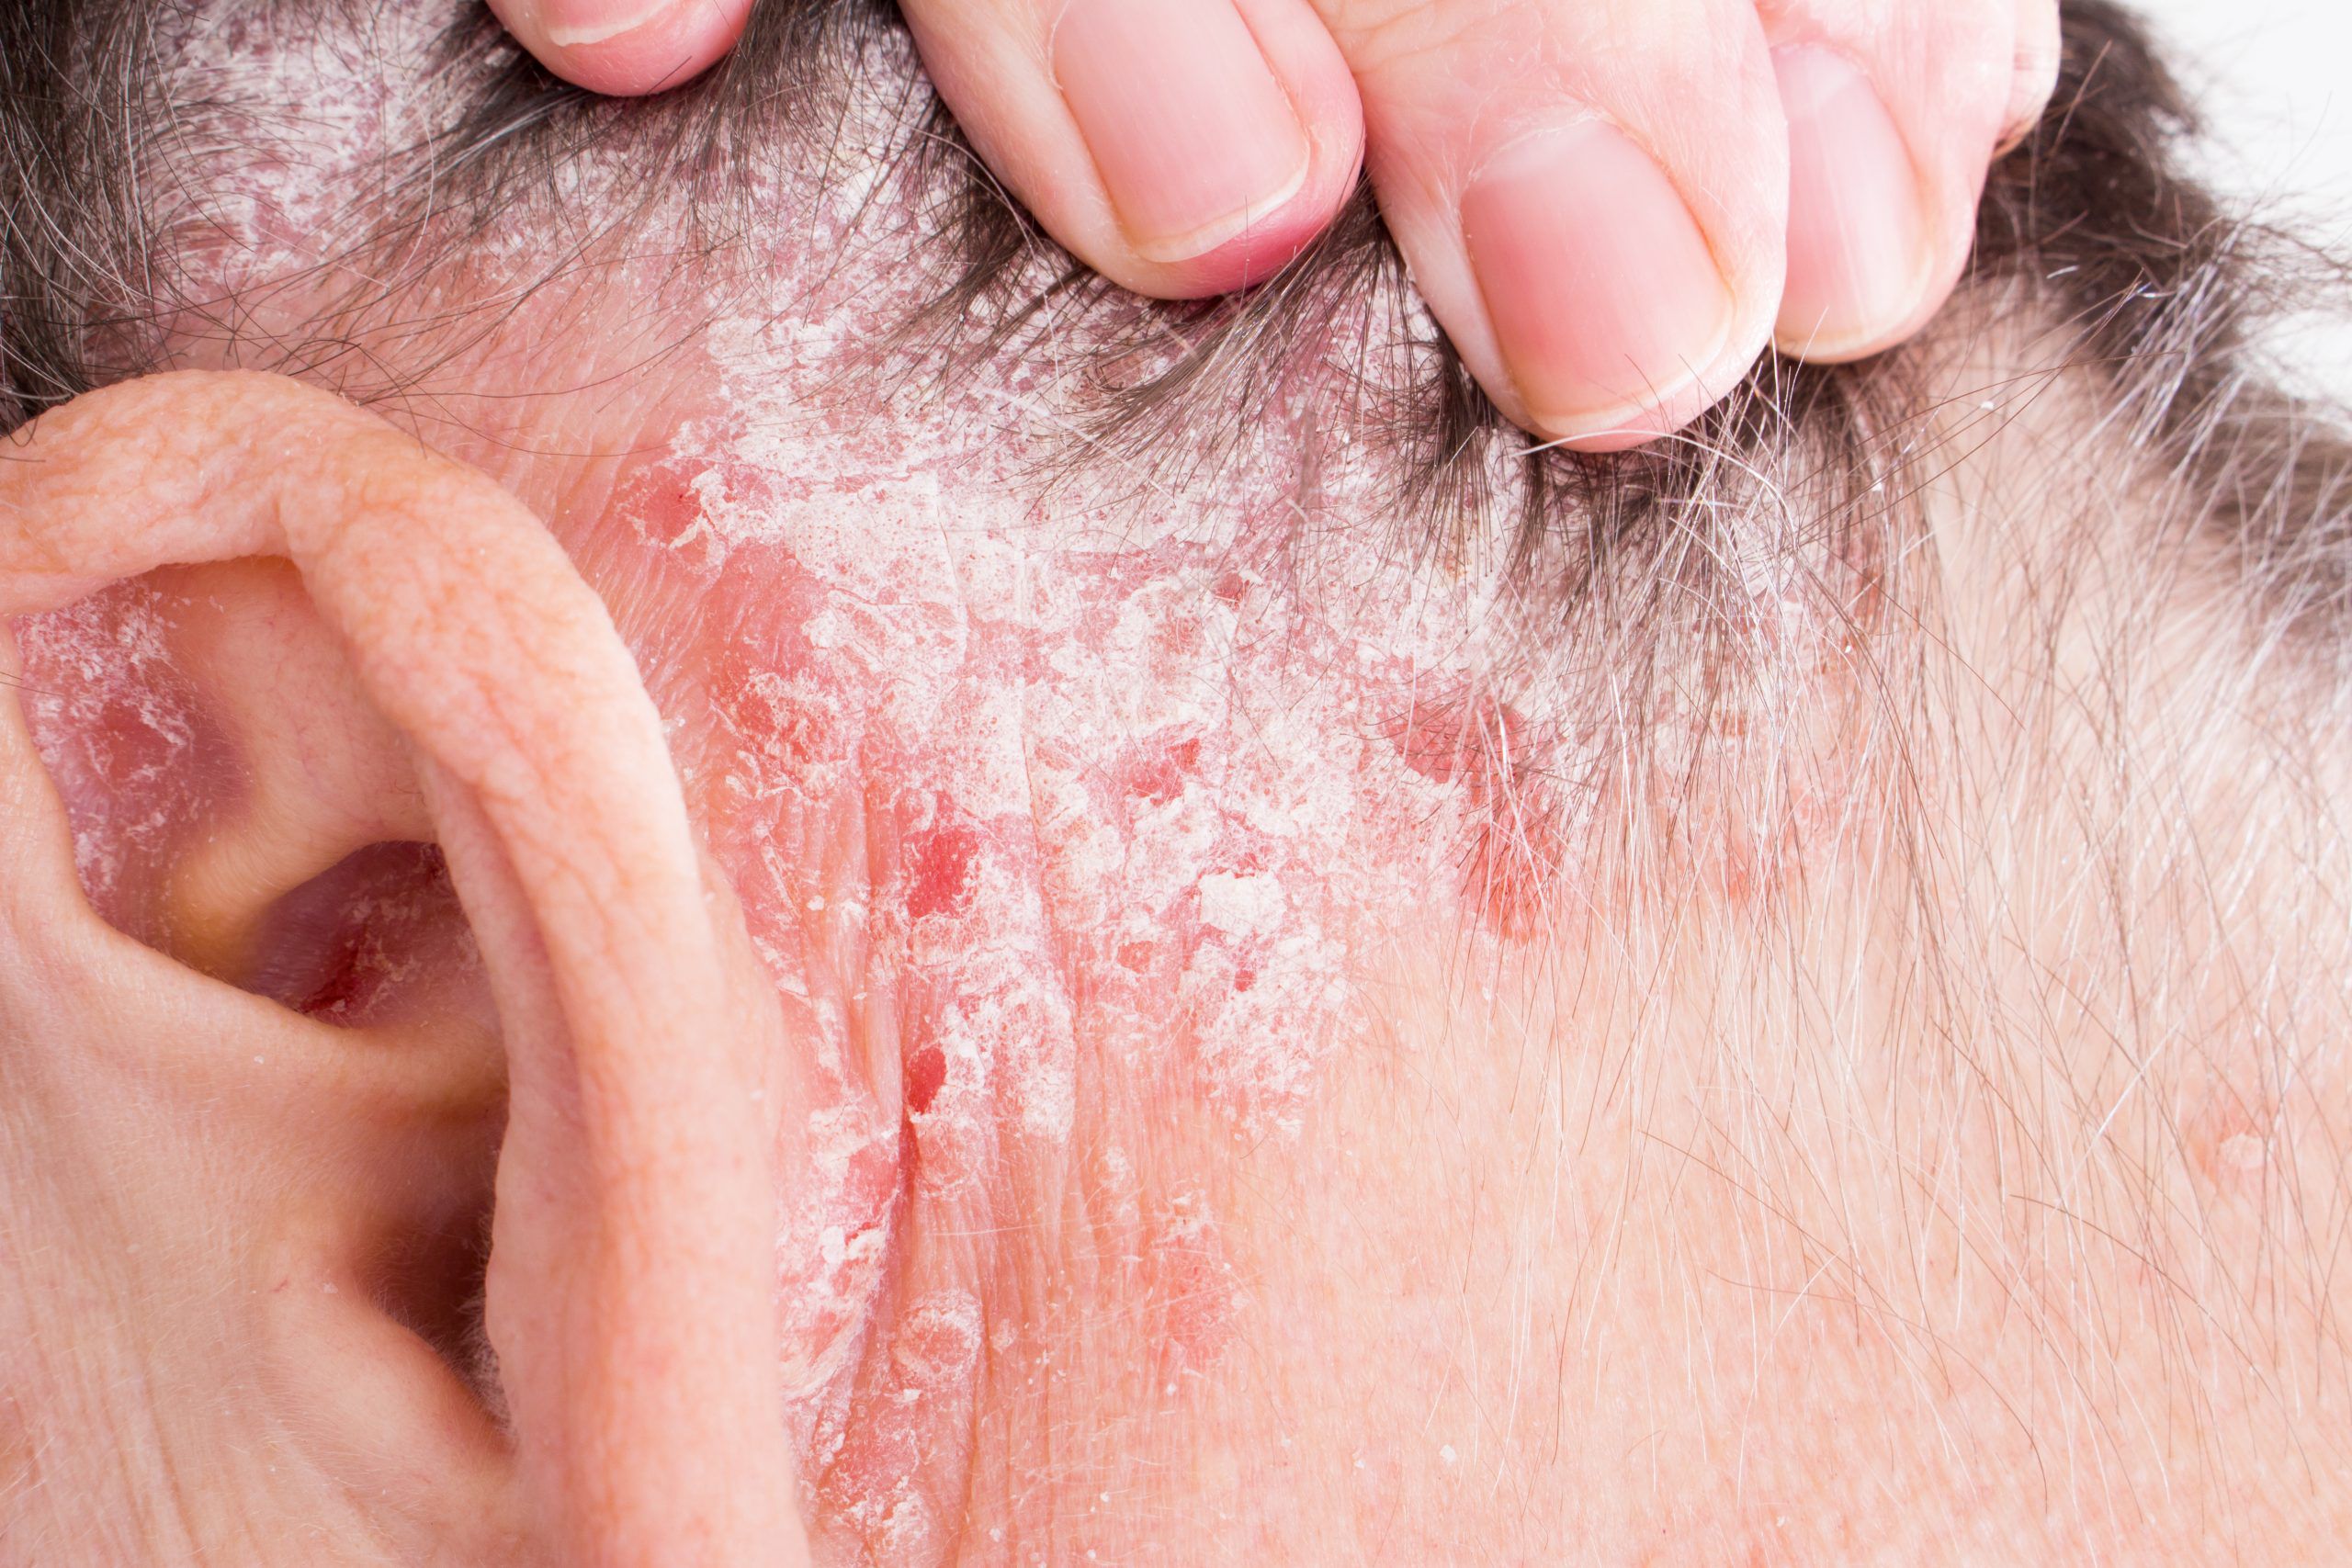 Psoriasis-how it affects the mind, marital life, and social life of patients?